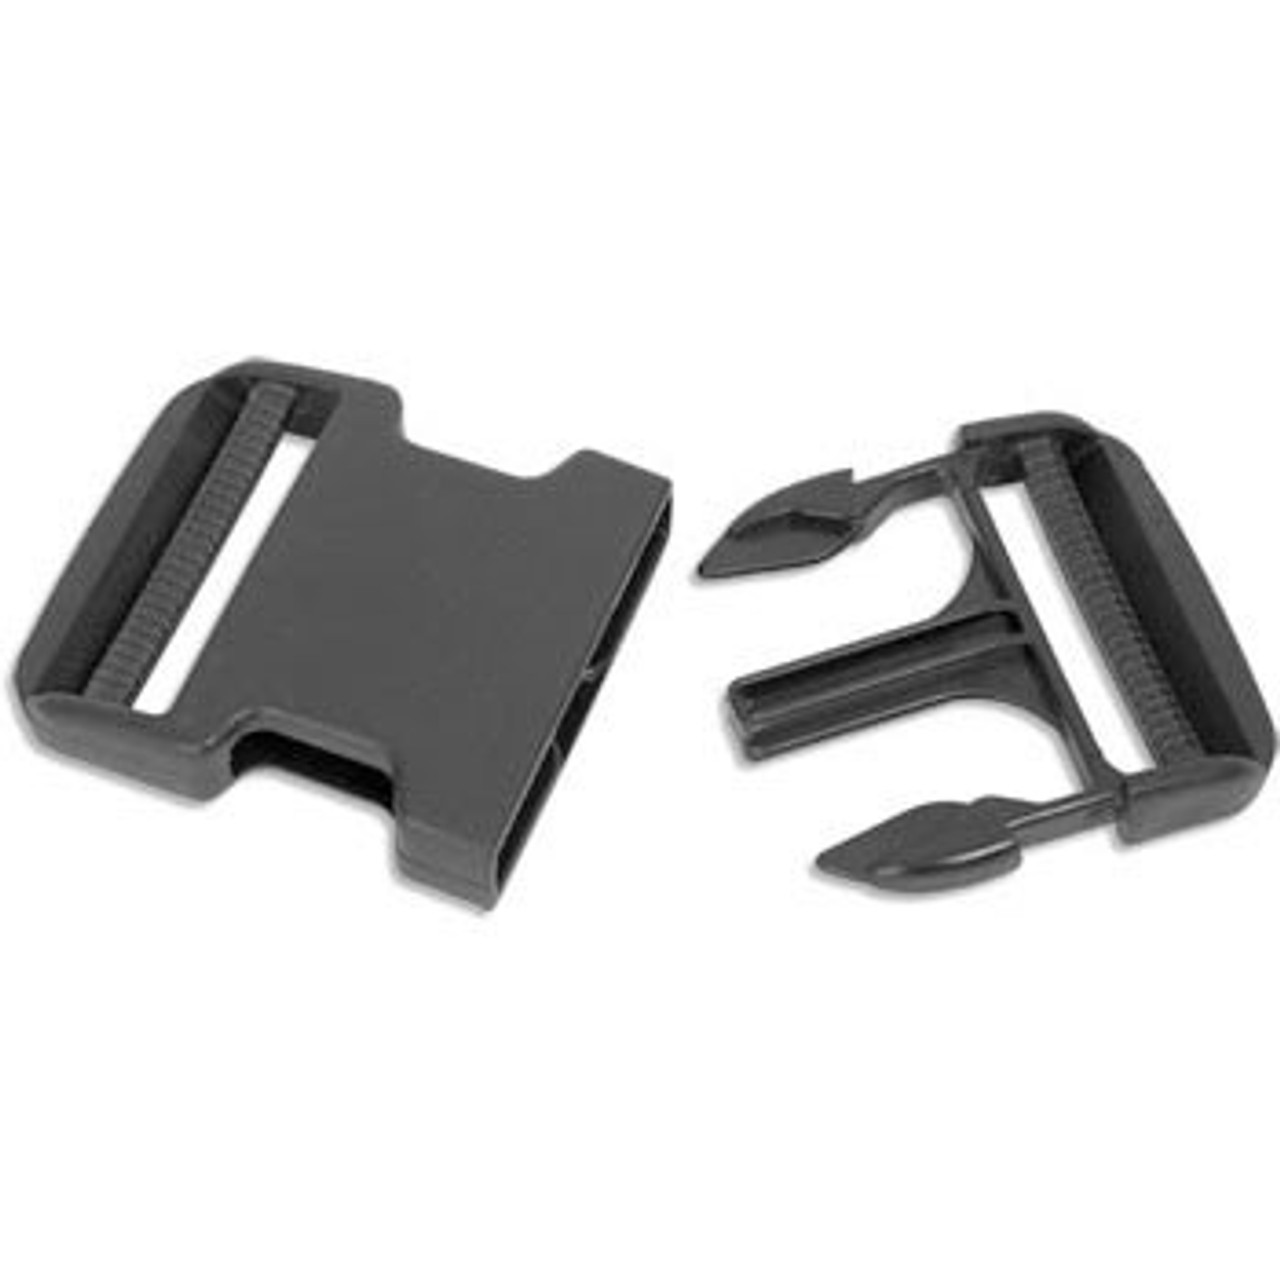 4 BUCKLES 1 1/2 or 2 Flat or Chamber SIDE RELEASE Buckle, 38mm or 51mm 